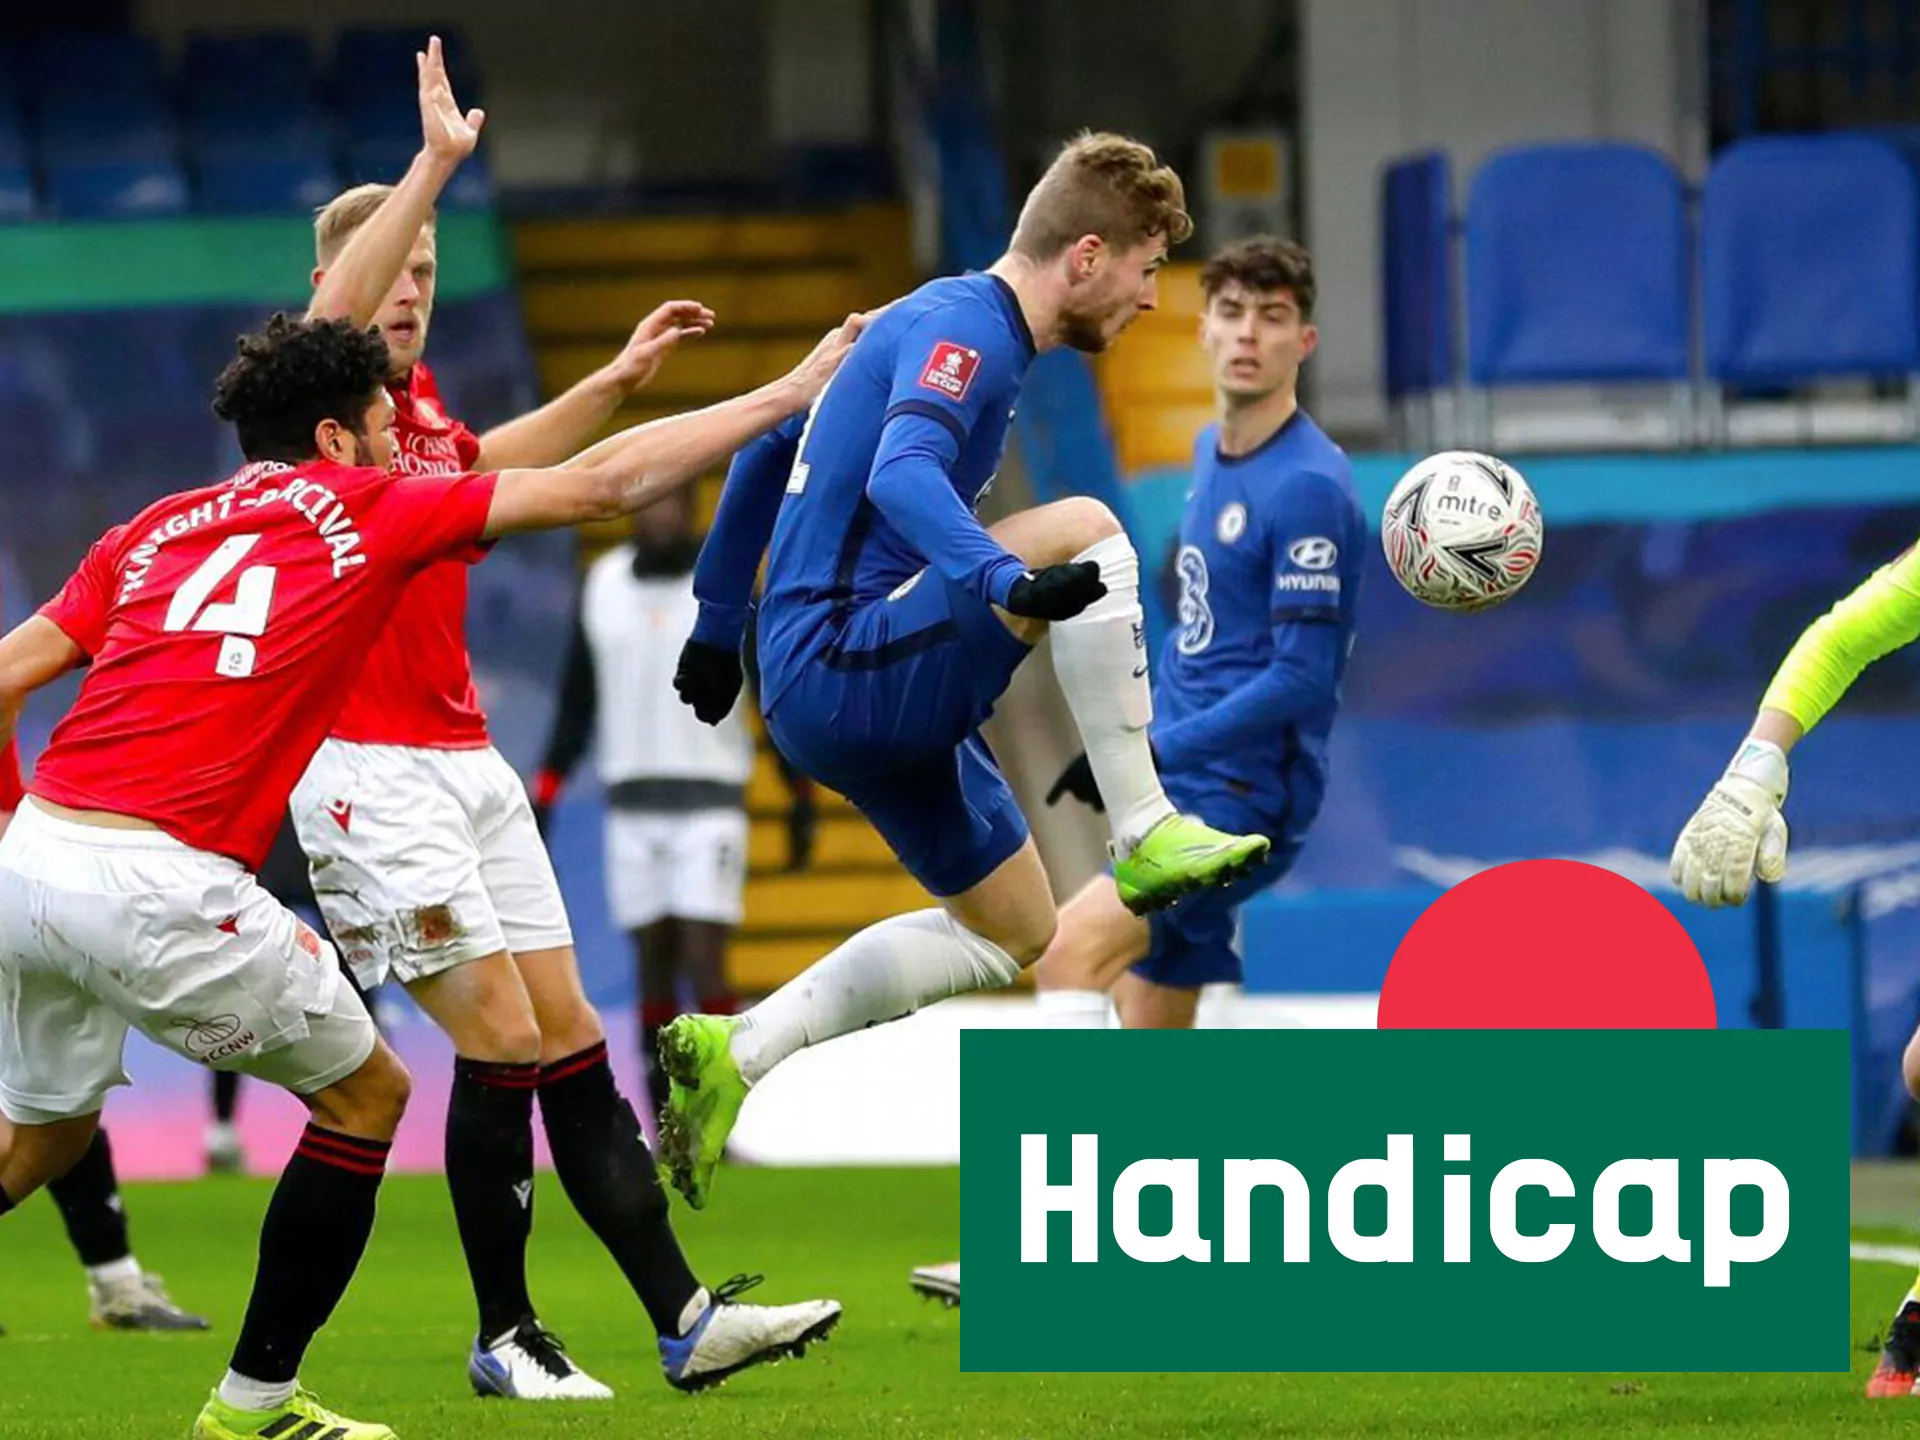 Handicap betting for peoples who have knowledge.